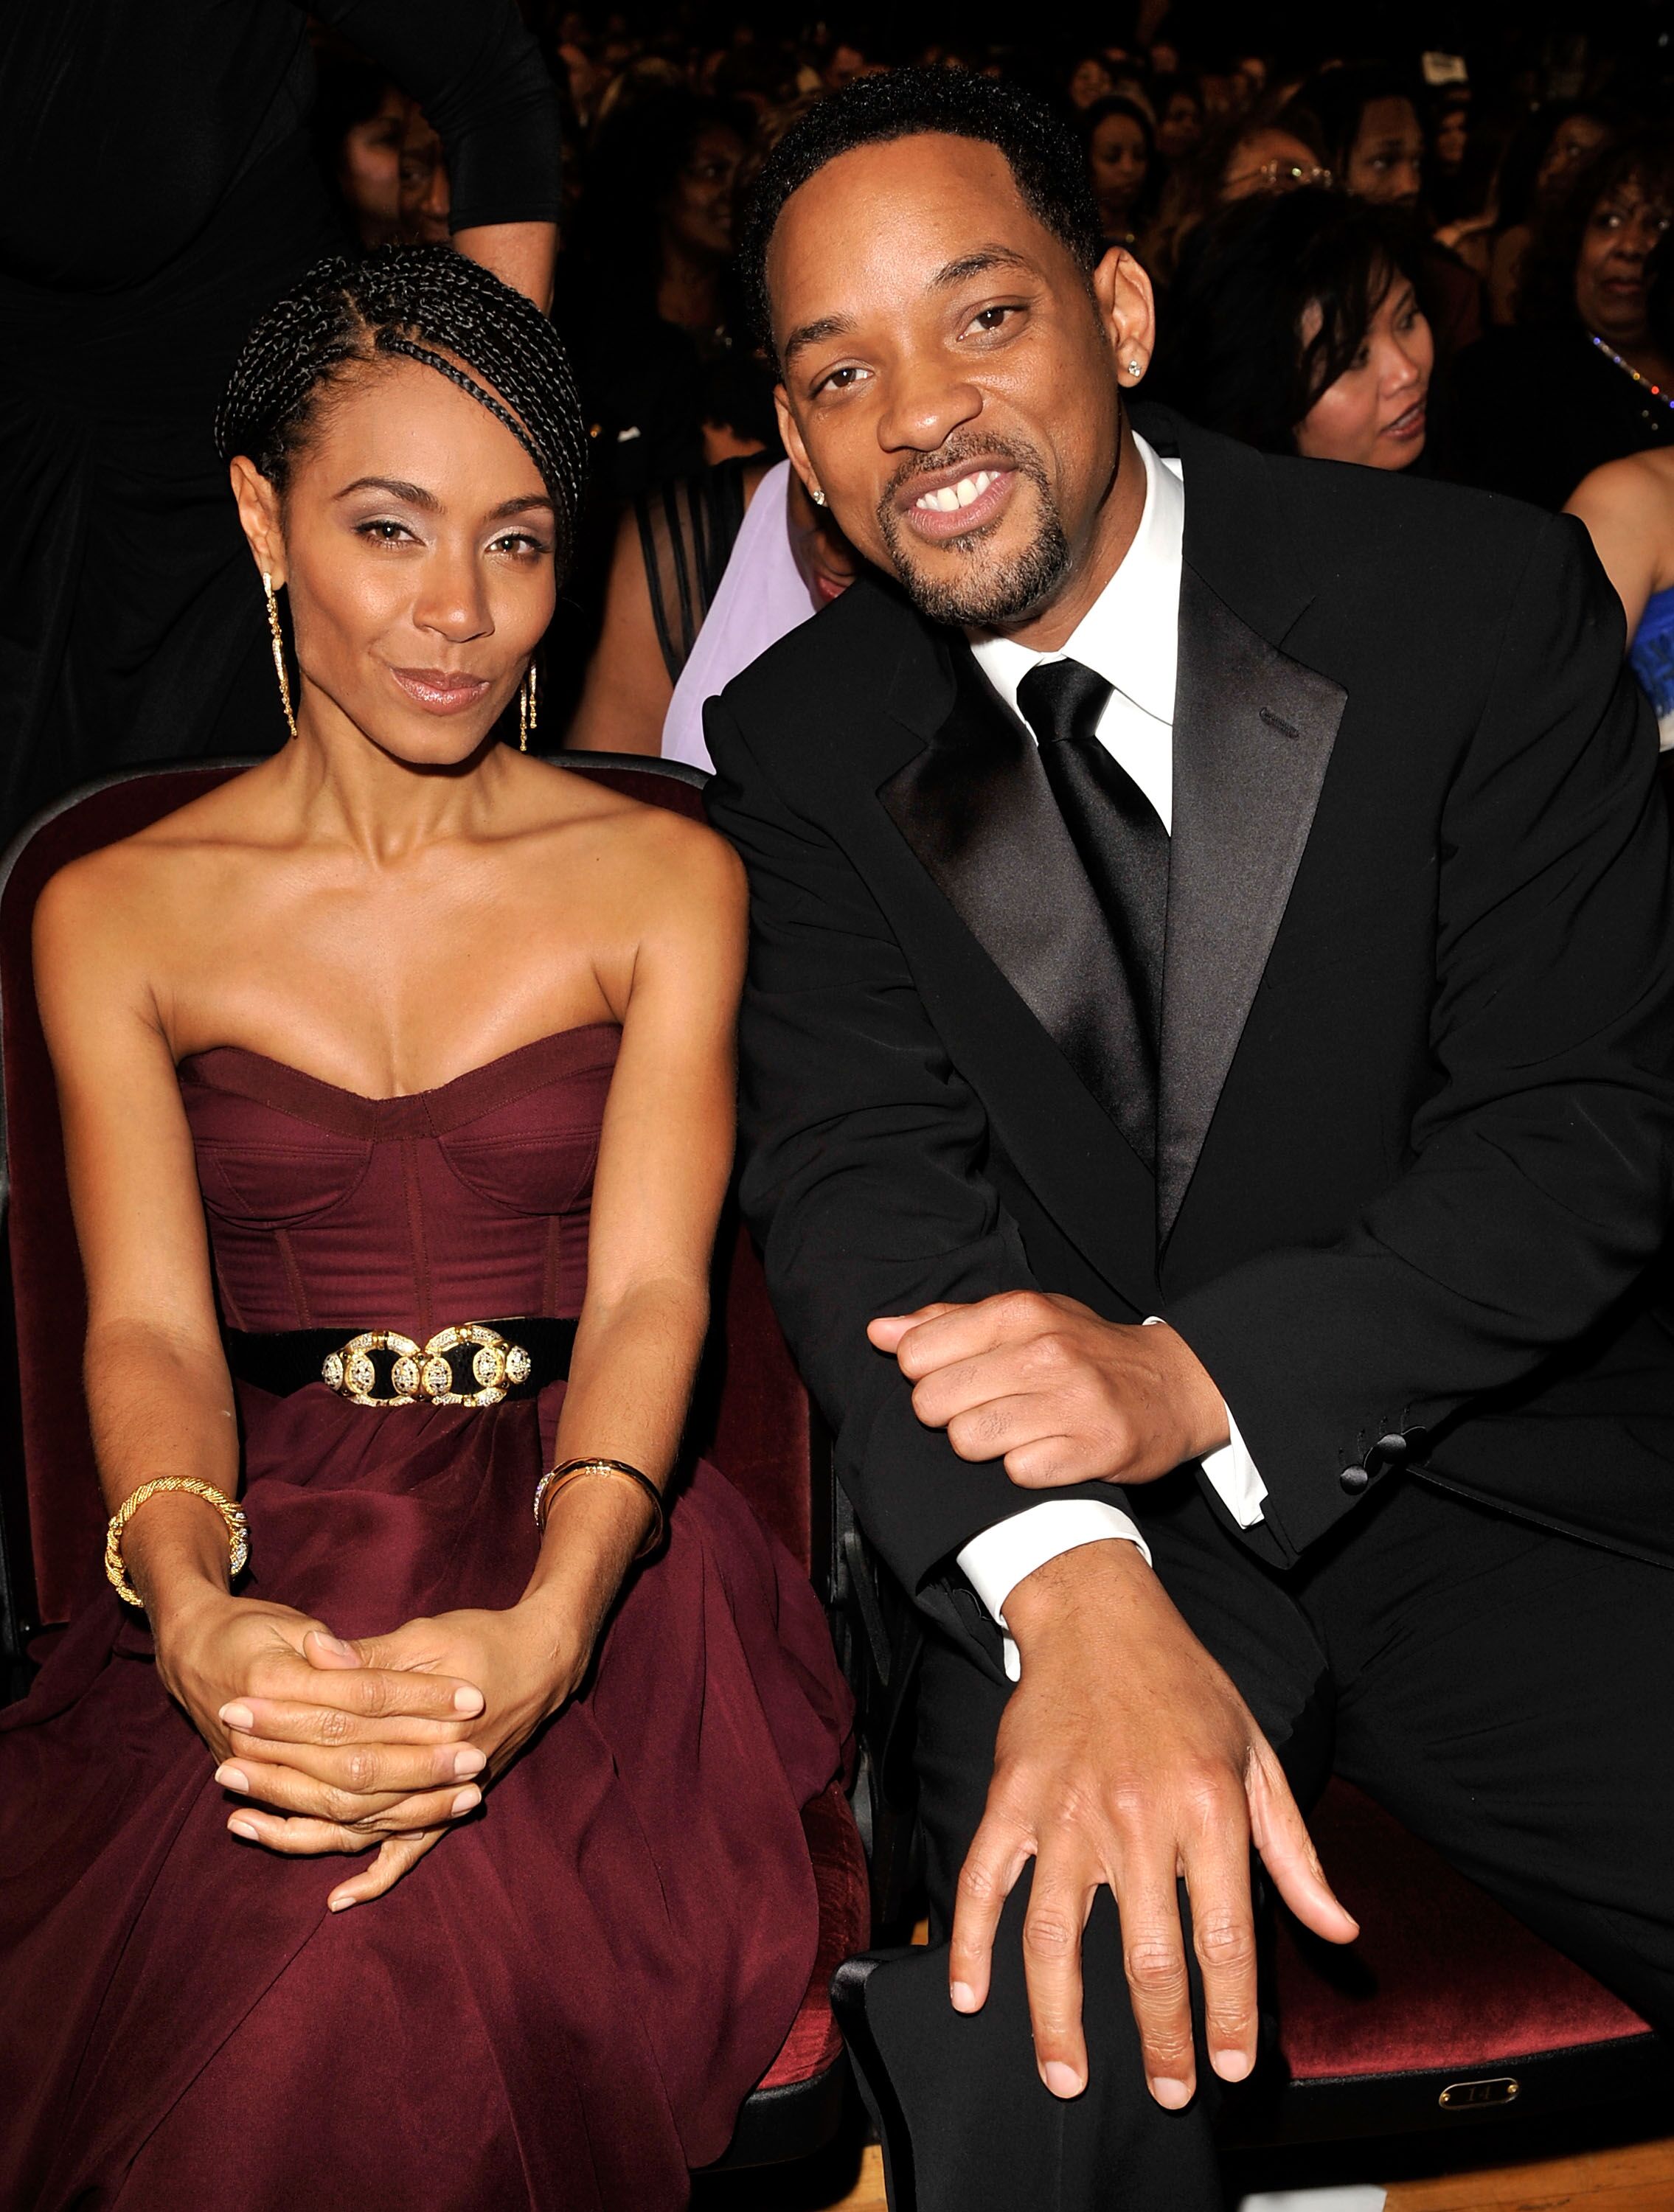 Will Smith and wife, Jada Pinkett Smith/ Source: Getty Images